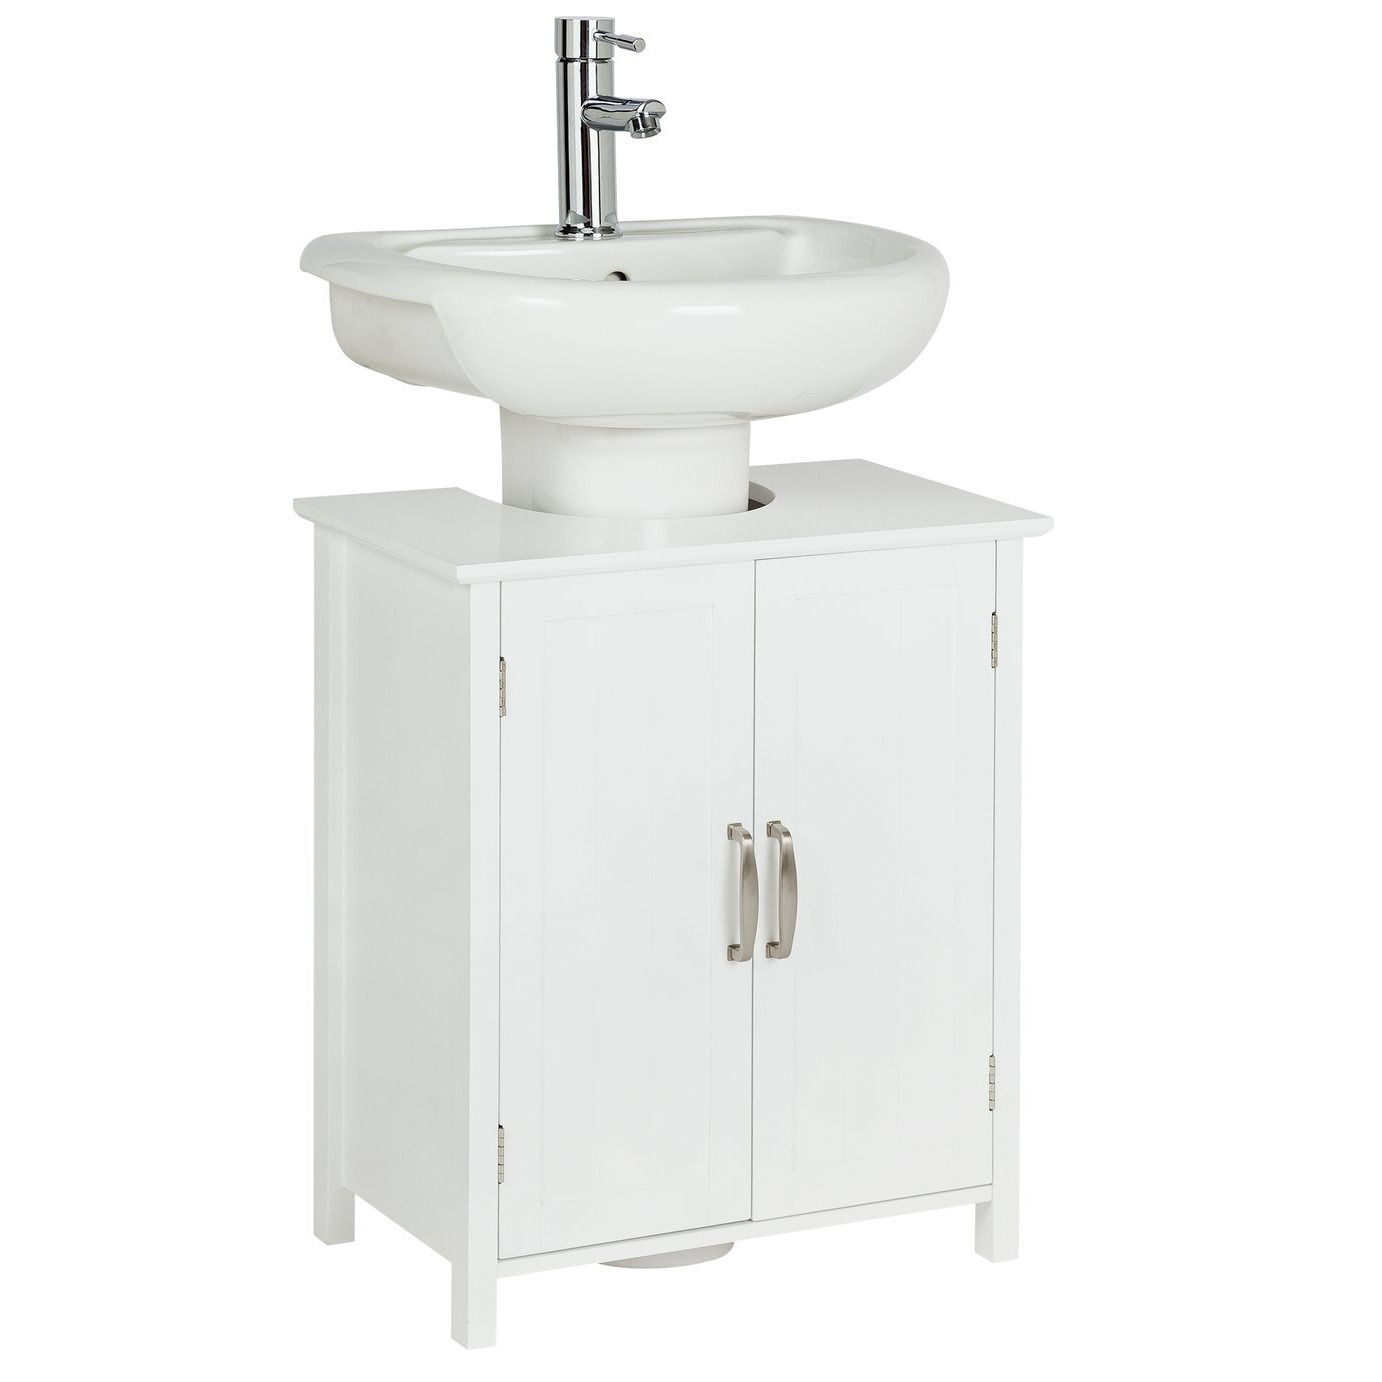 Argos Home Tongue & Groove Under Sink Unit - White - image 1